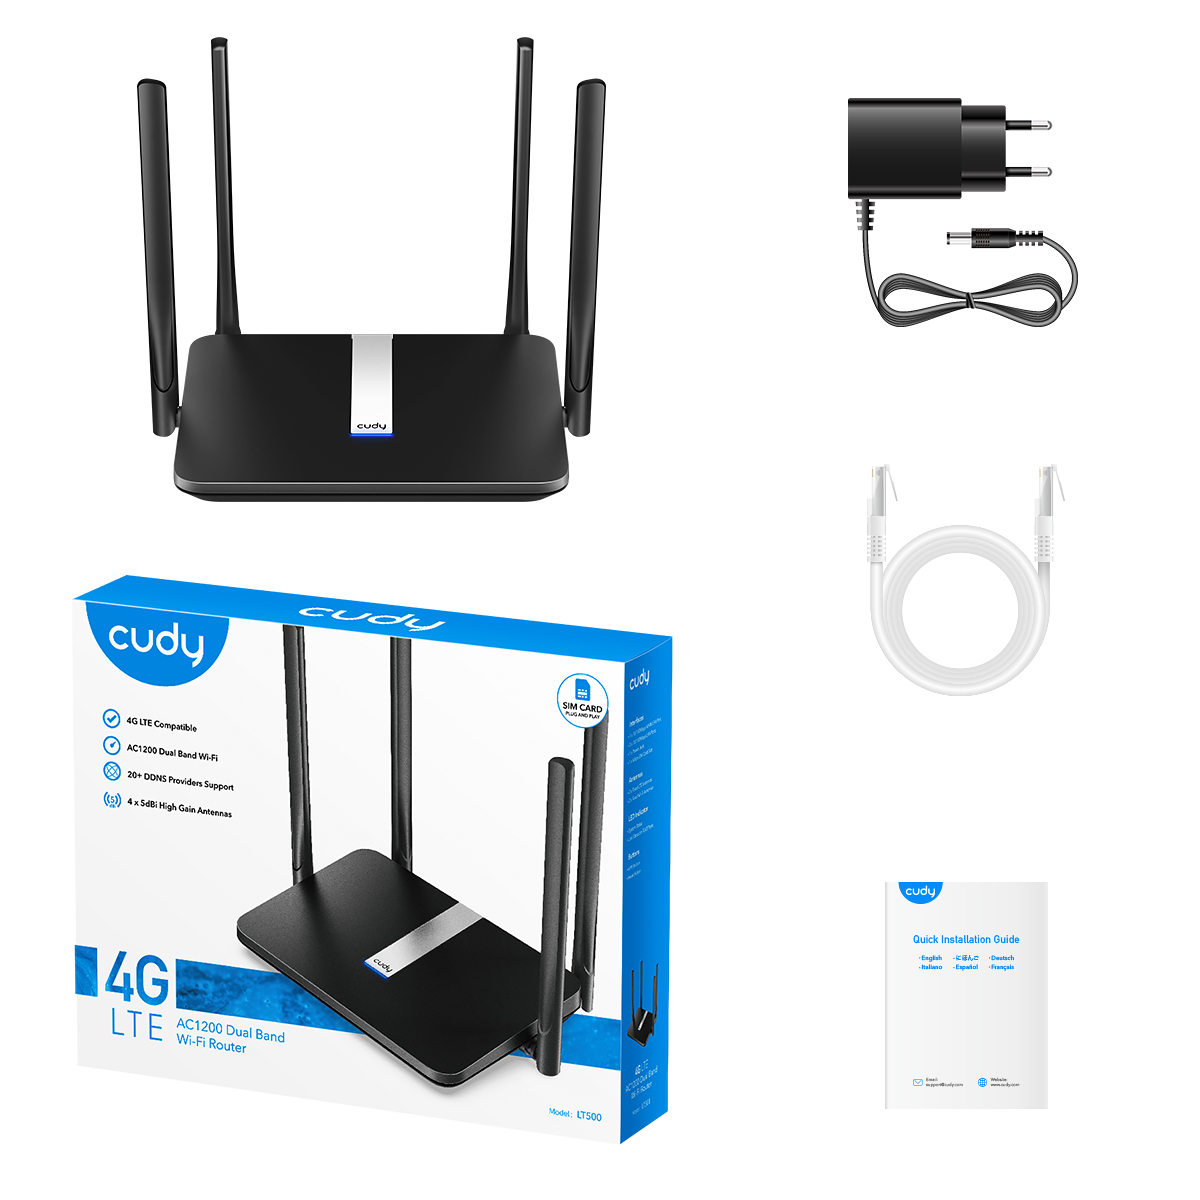 bekræft venligst konkurrence jorden 4G LTE AC1200 Dual Band Wi-Fi Router, Model: LT500-Cudy: WiFi, 4G, and 5G  Equipments and Solutions